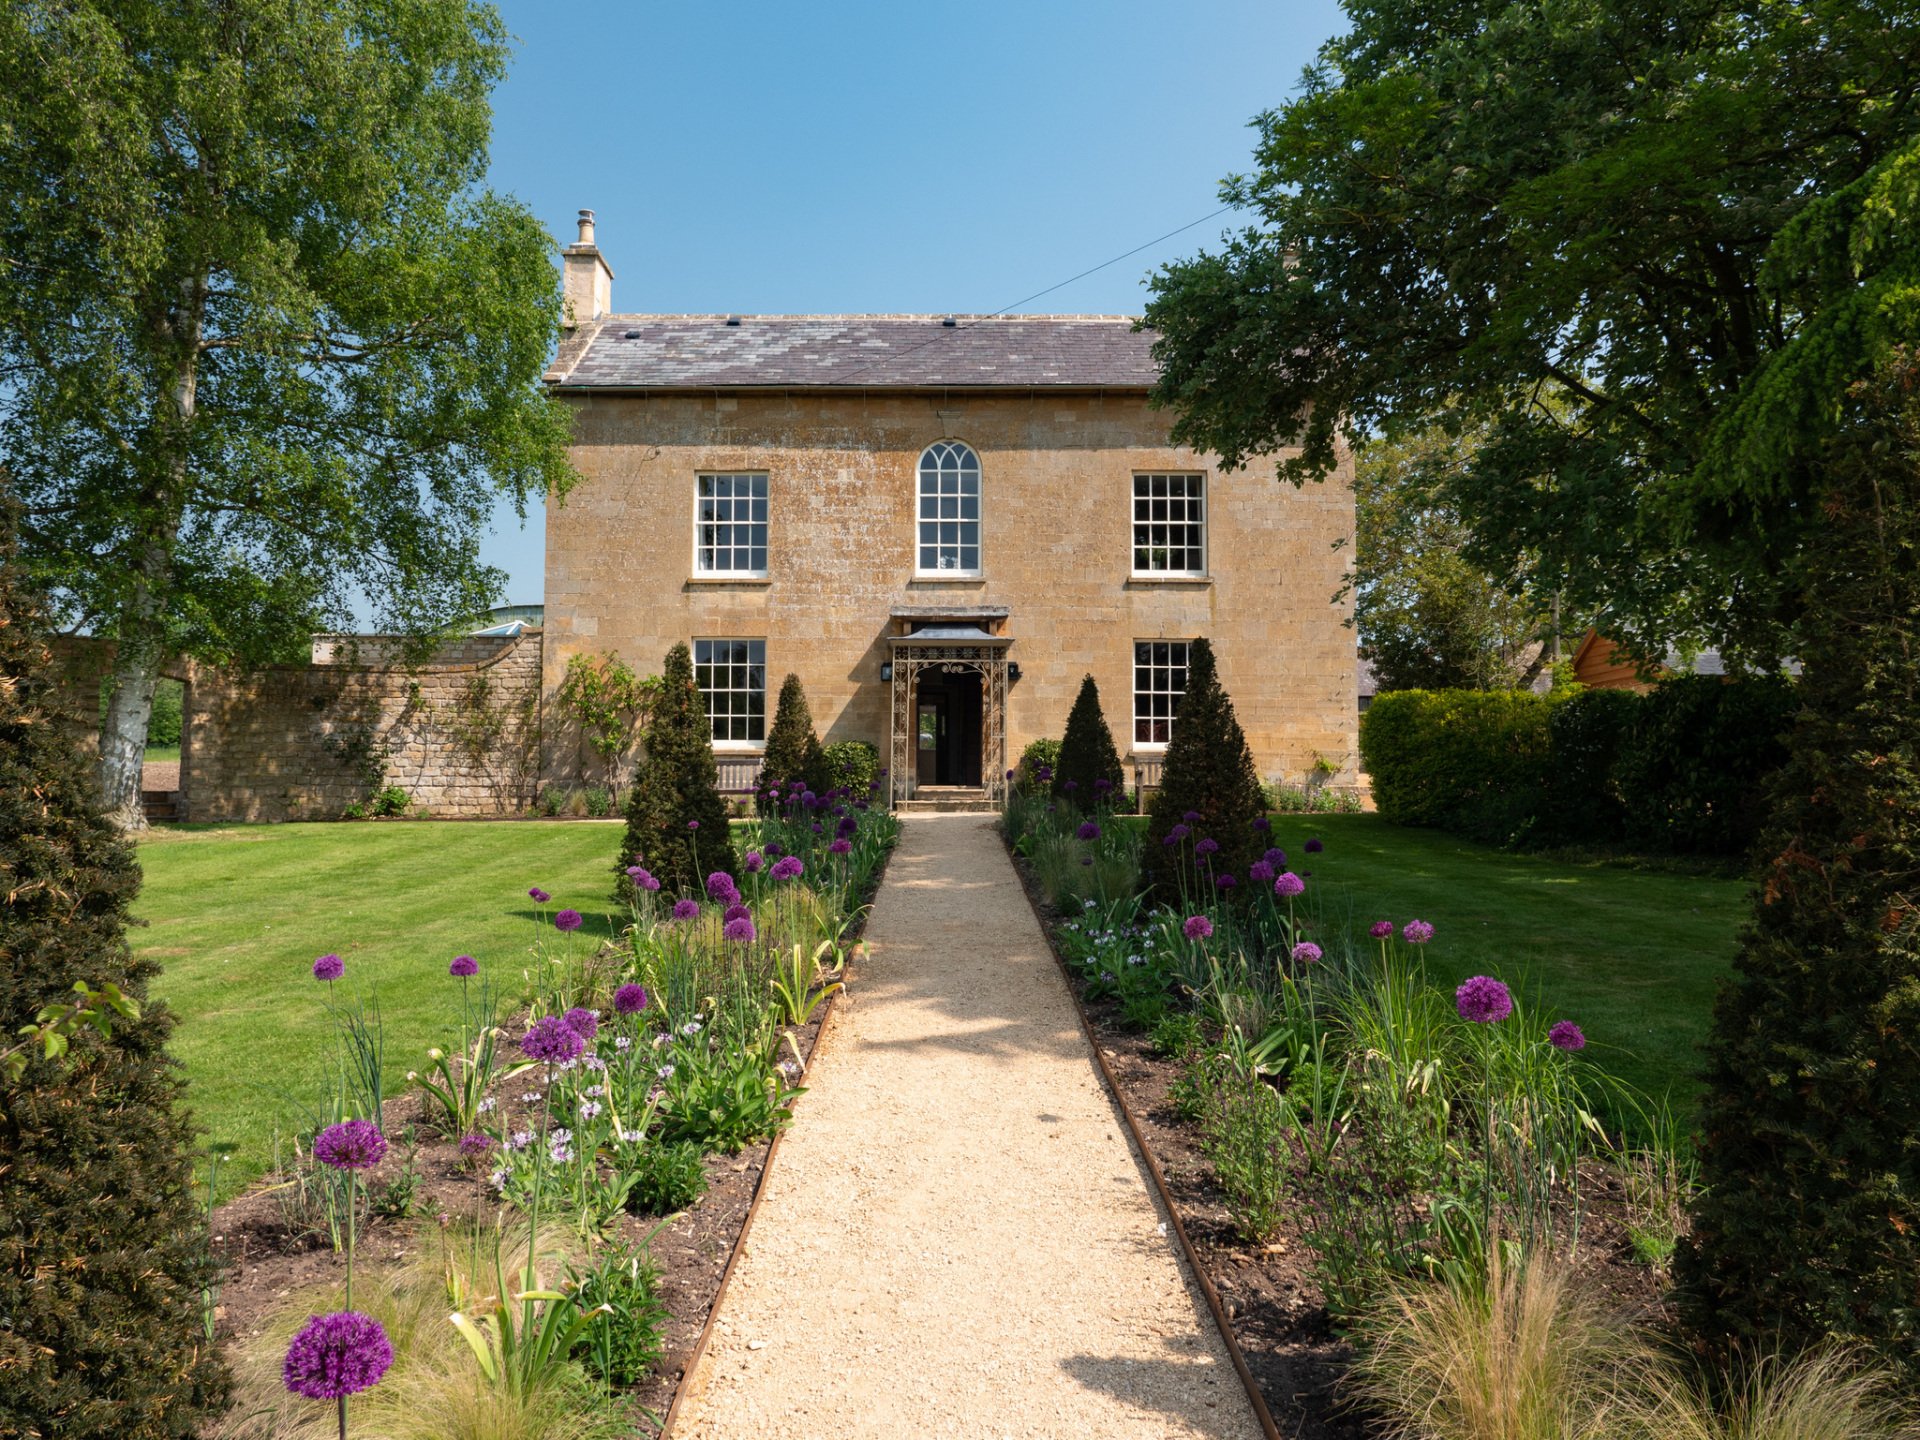 Win one of two £750 Vouchers for Premier Cottages